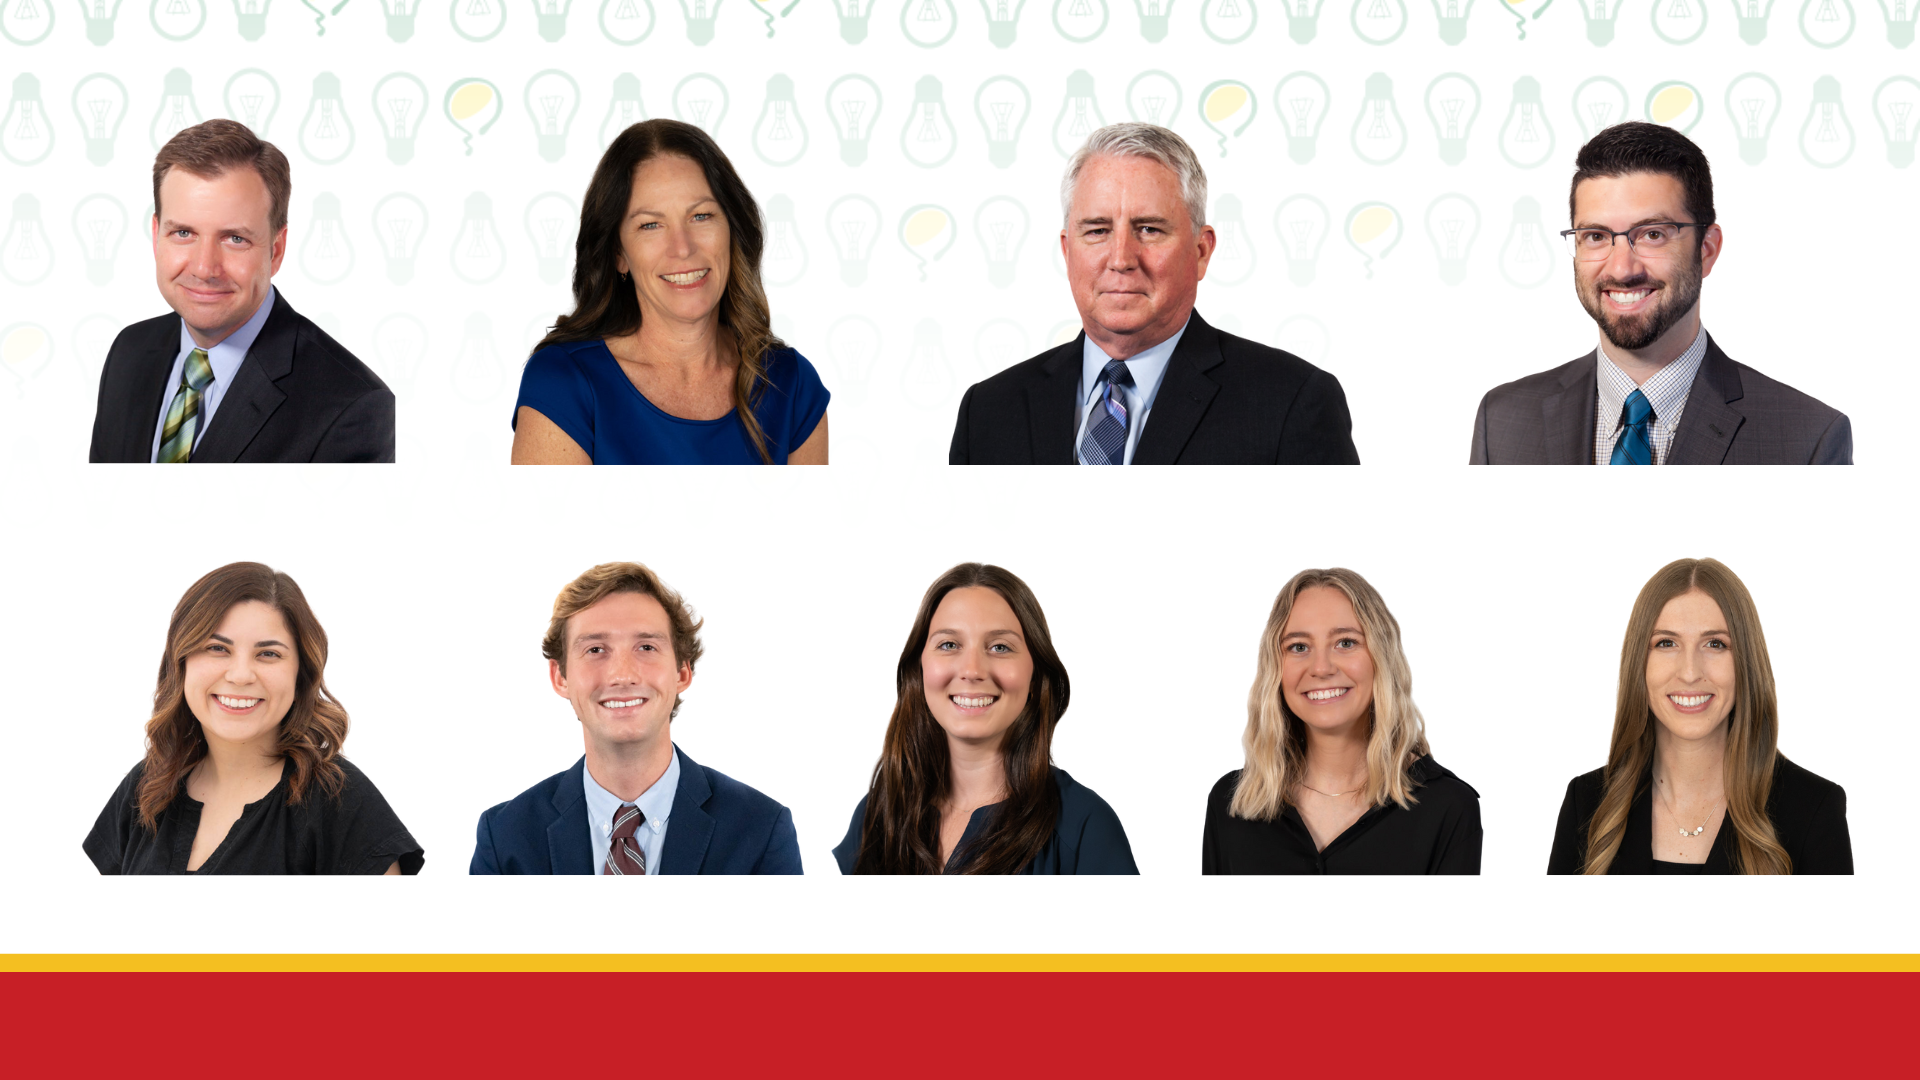 Tripepi Smith Cal Cities 2024 City Manager Conference team. Top (from right to left): Ryder Todd Smith, Jennifer Vaughn, Mike Egan and Jon Barilone Bottom (from left to right): Kaetlyn Hernandez, Charlie Mounts, Alyson Nichols, Devin Antonio and Kaitlyn Wu